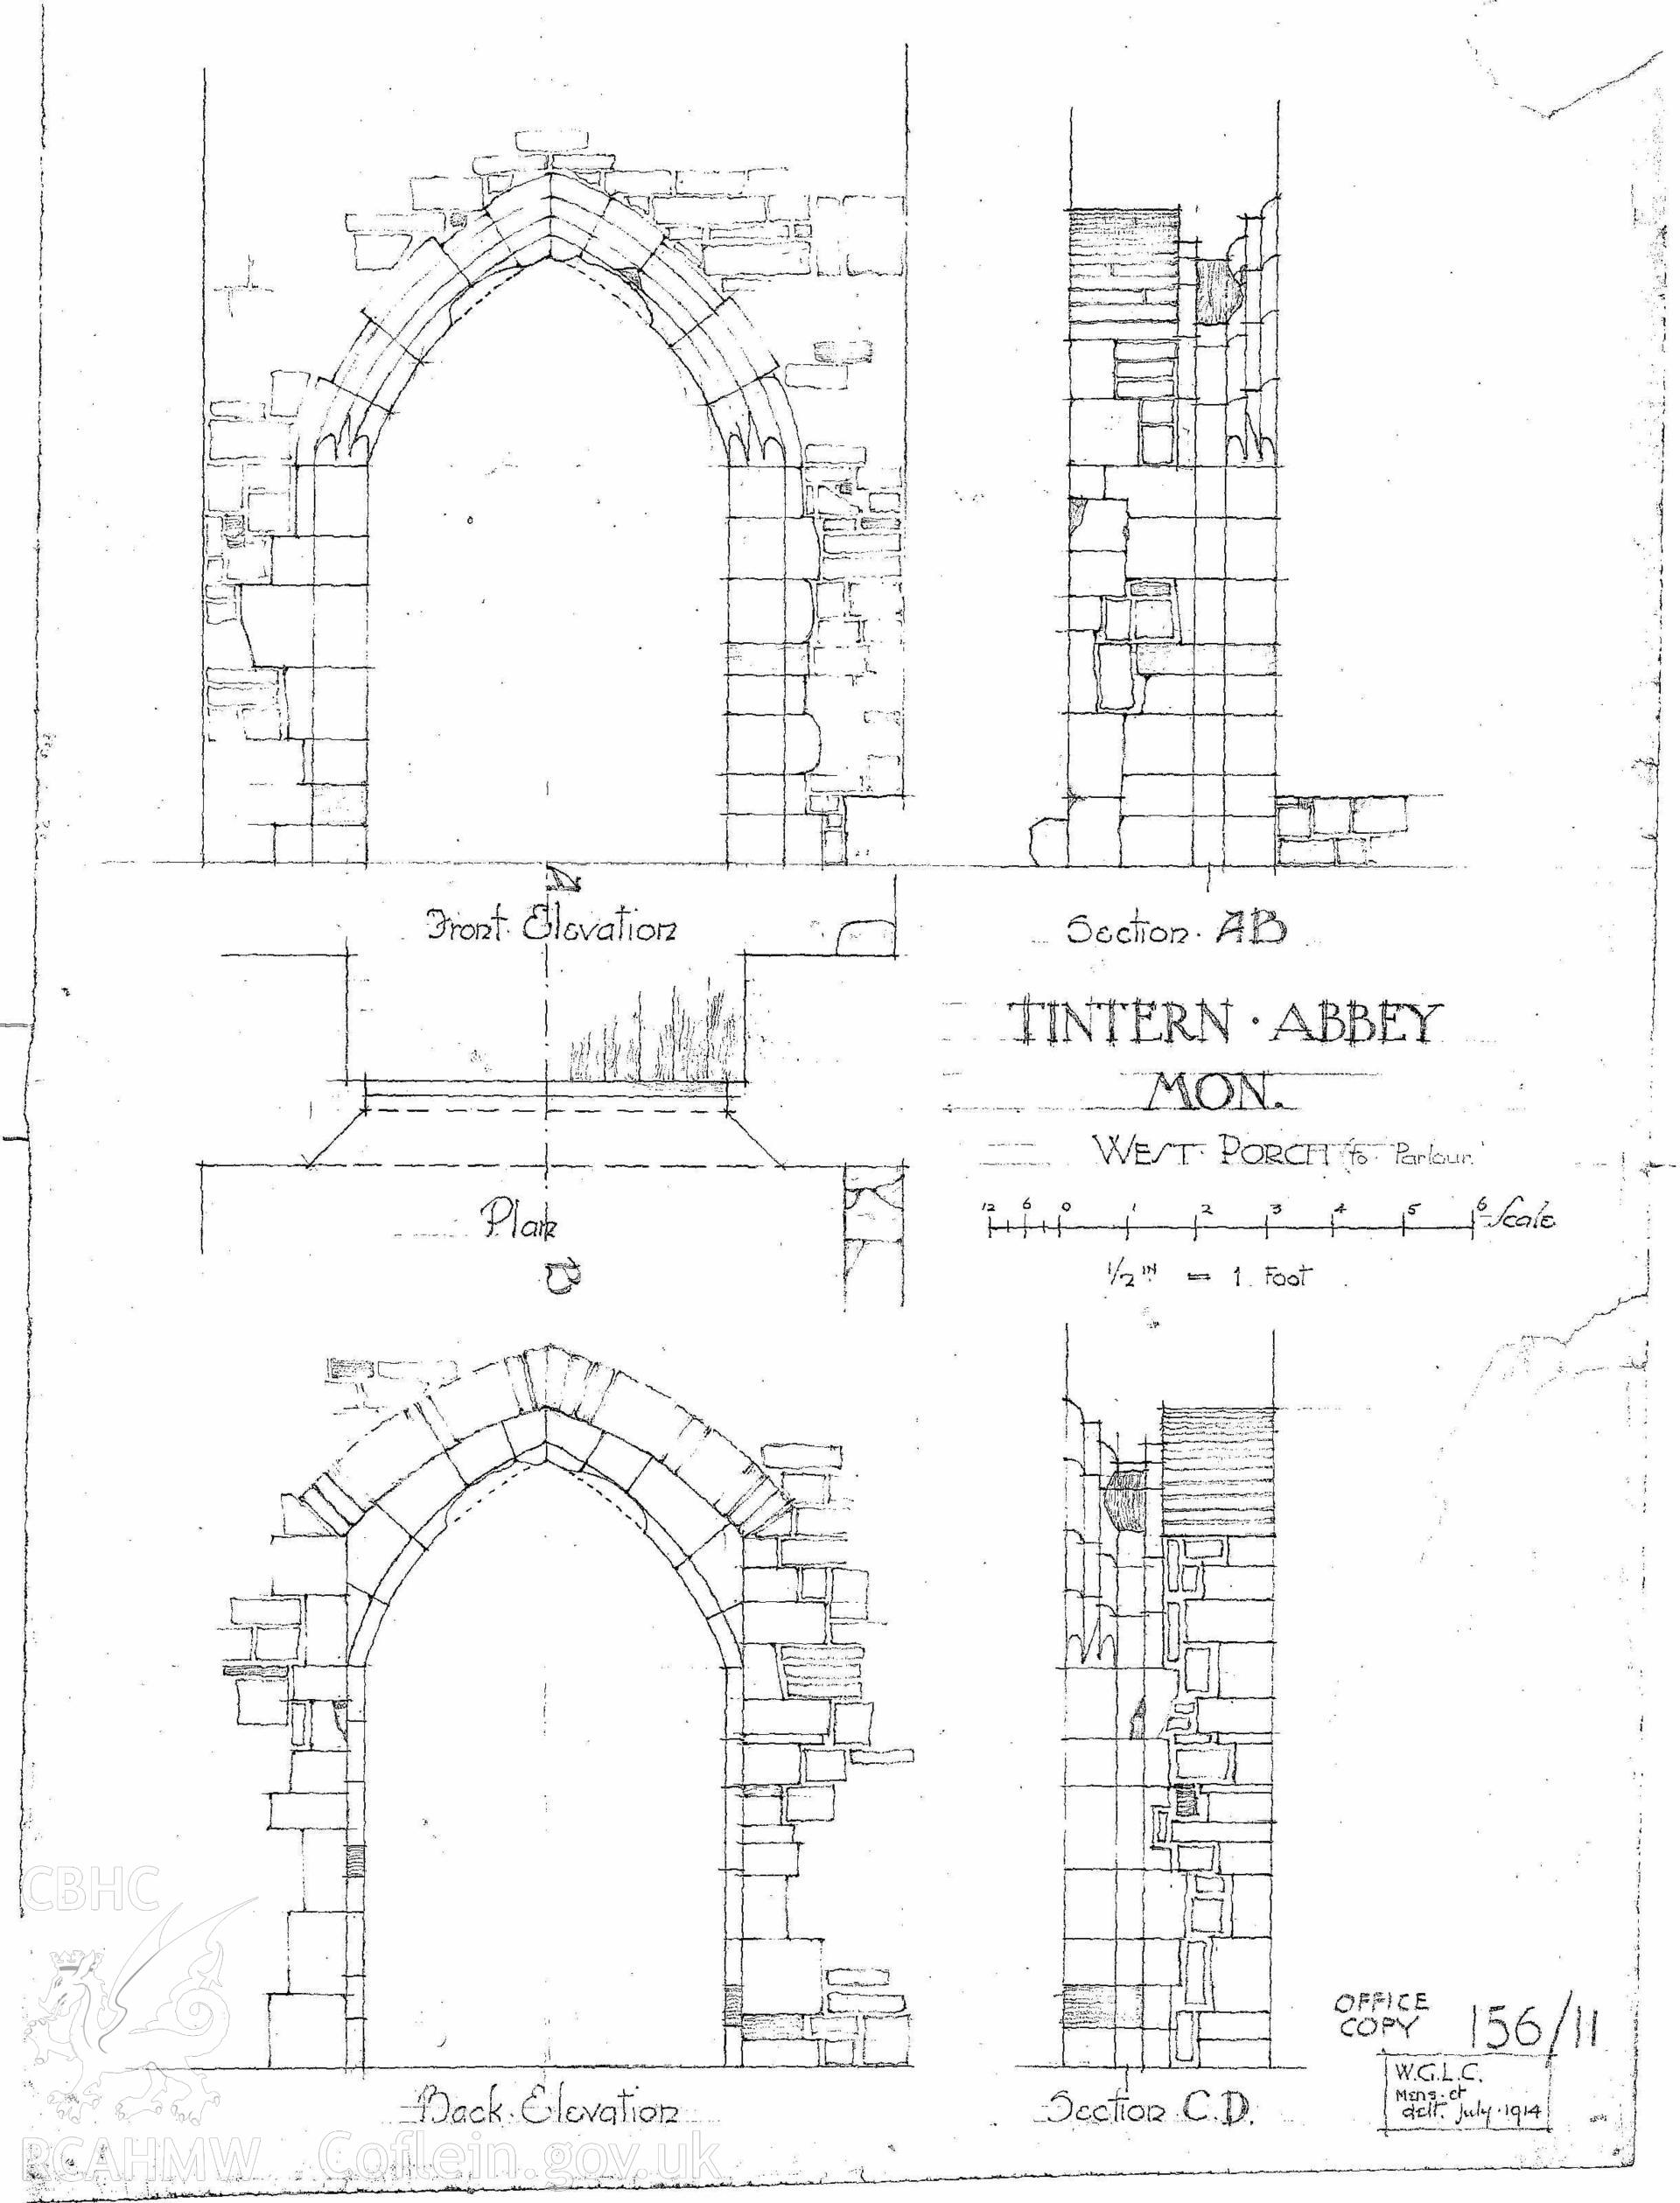 Cadw guardianship monument drawing of Tintern Abbey. Elevation W porch to parlour. Cadw ref. No. 156/11. Scale 1:24.